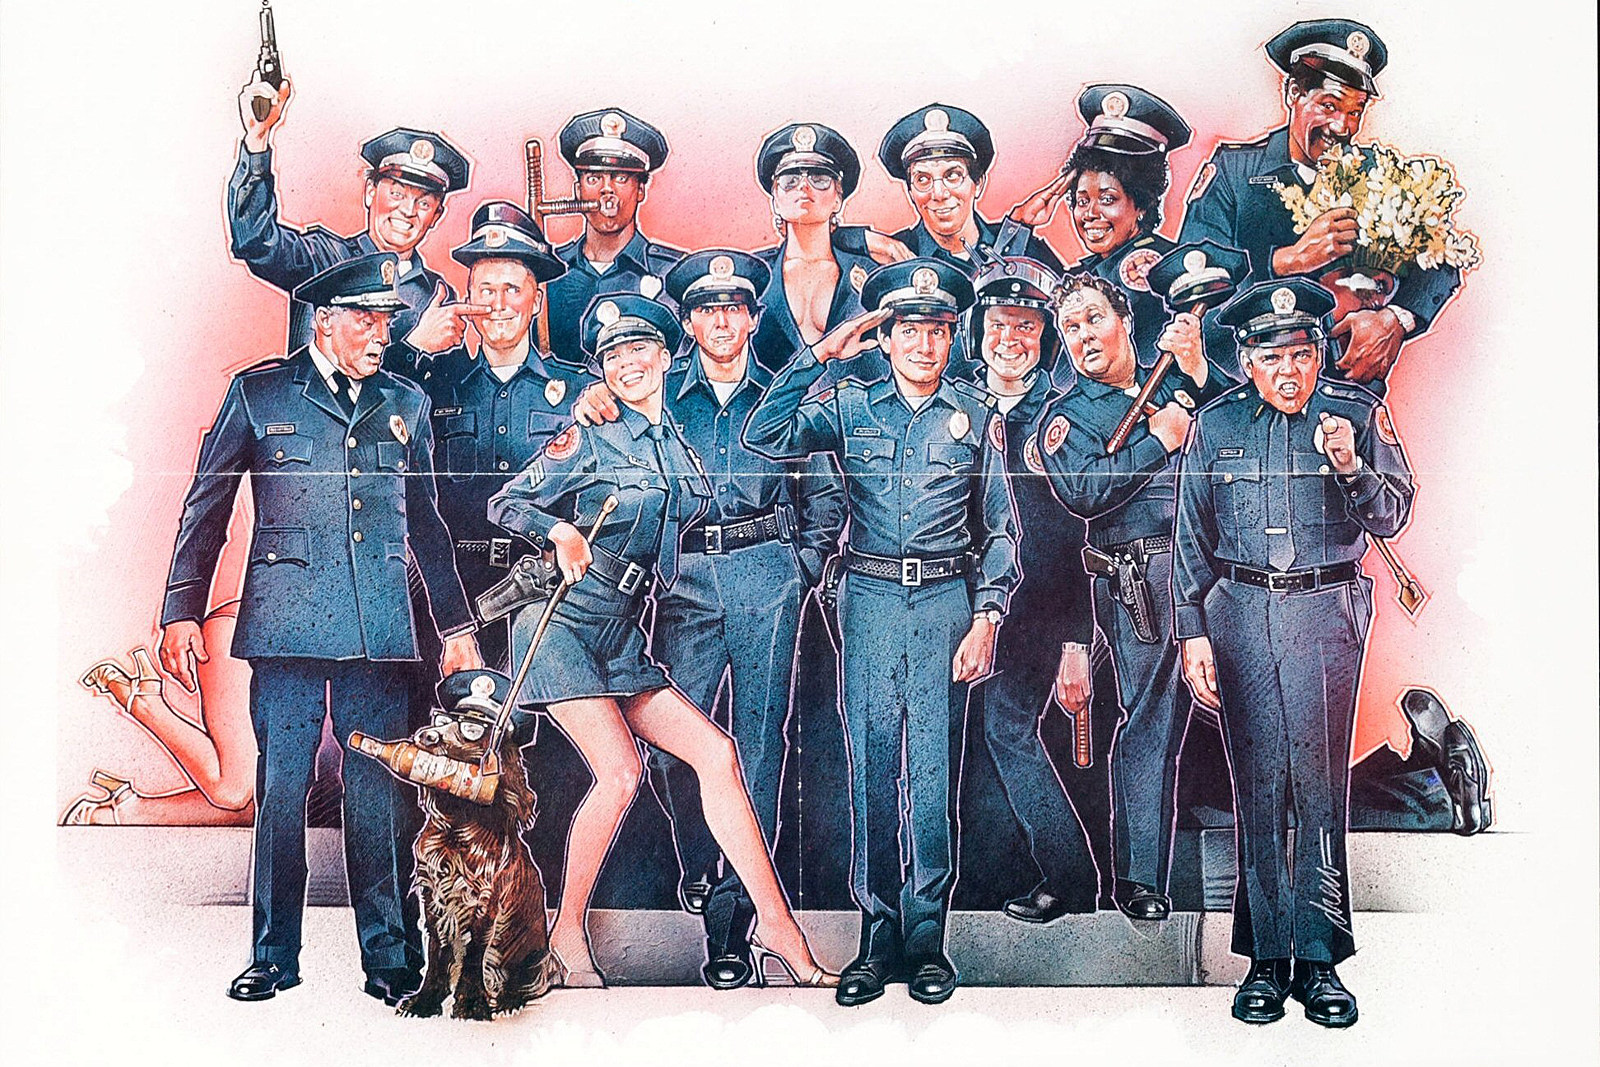 More Flatulence, More T&A': The Birth of 'Police Academy'